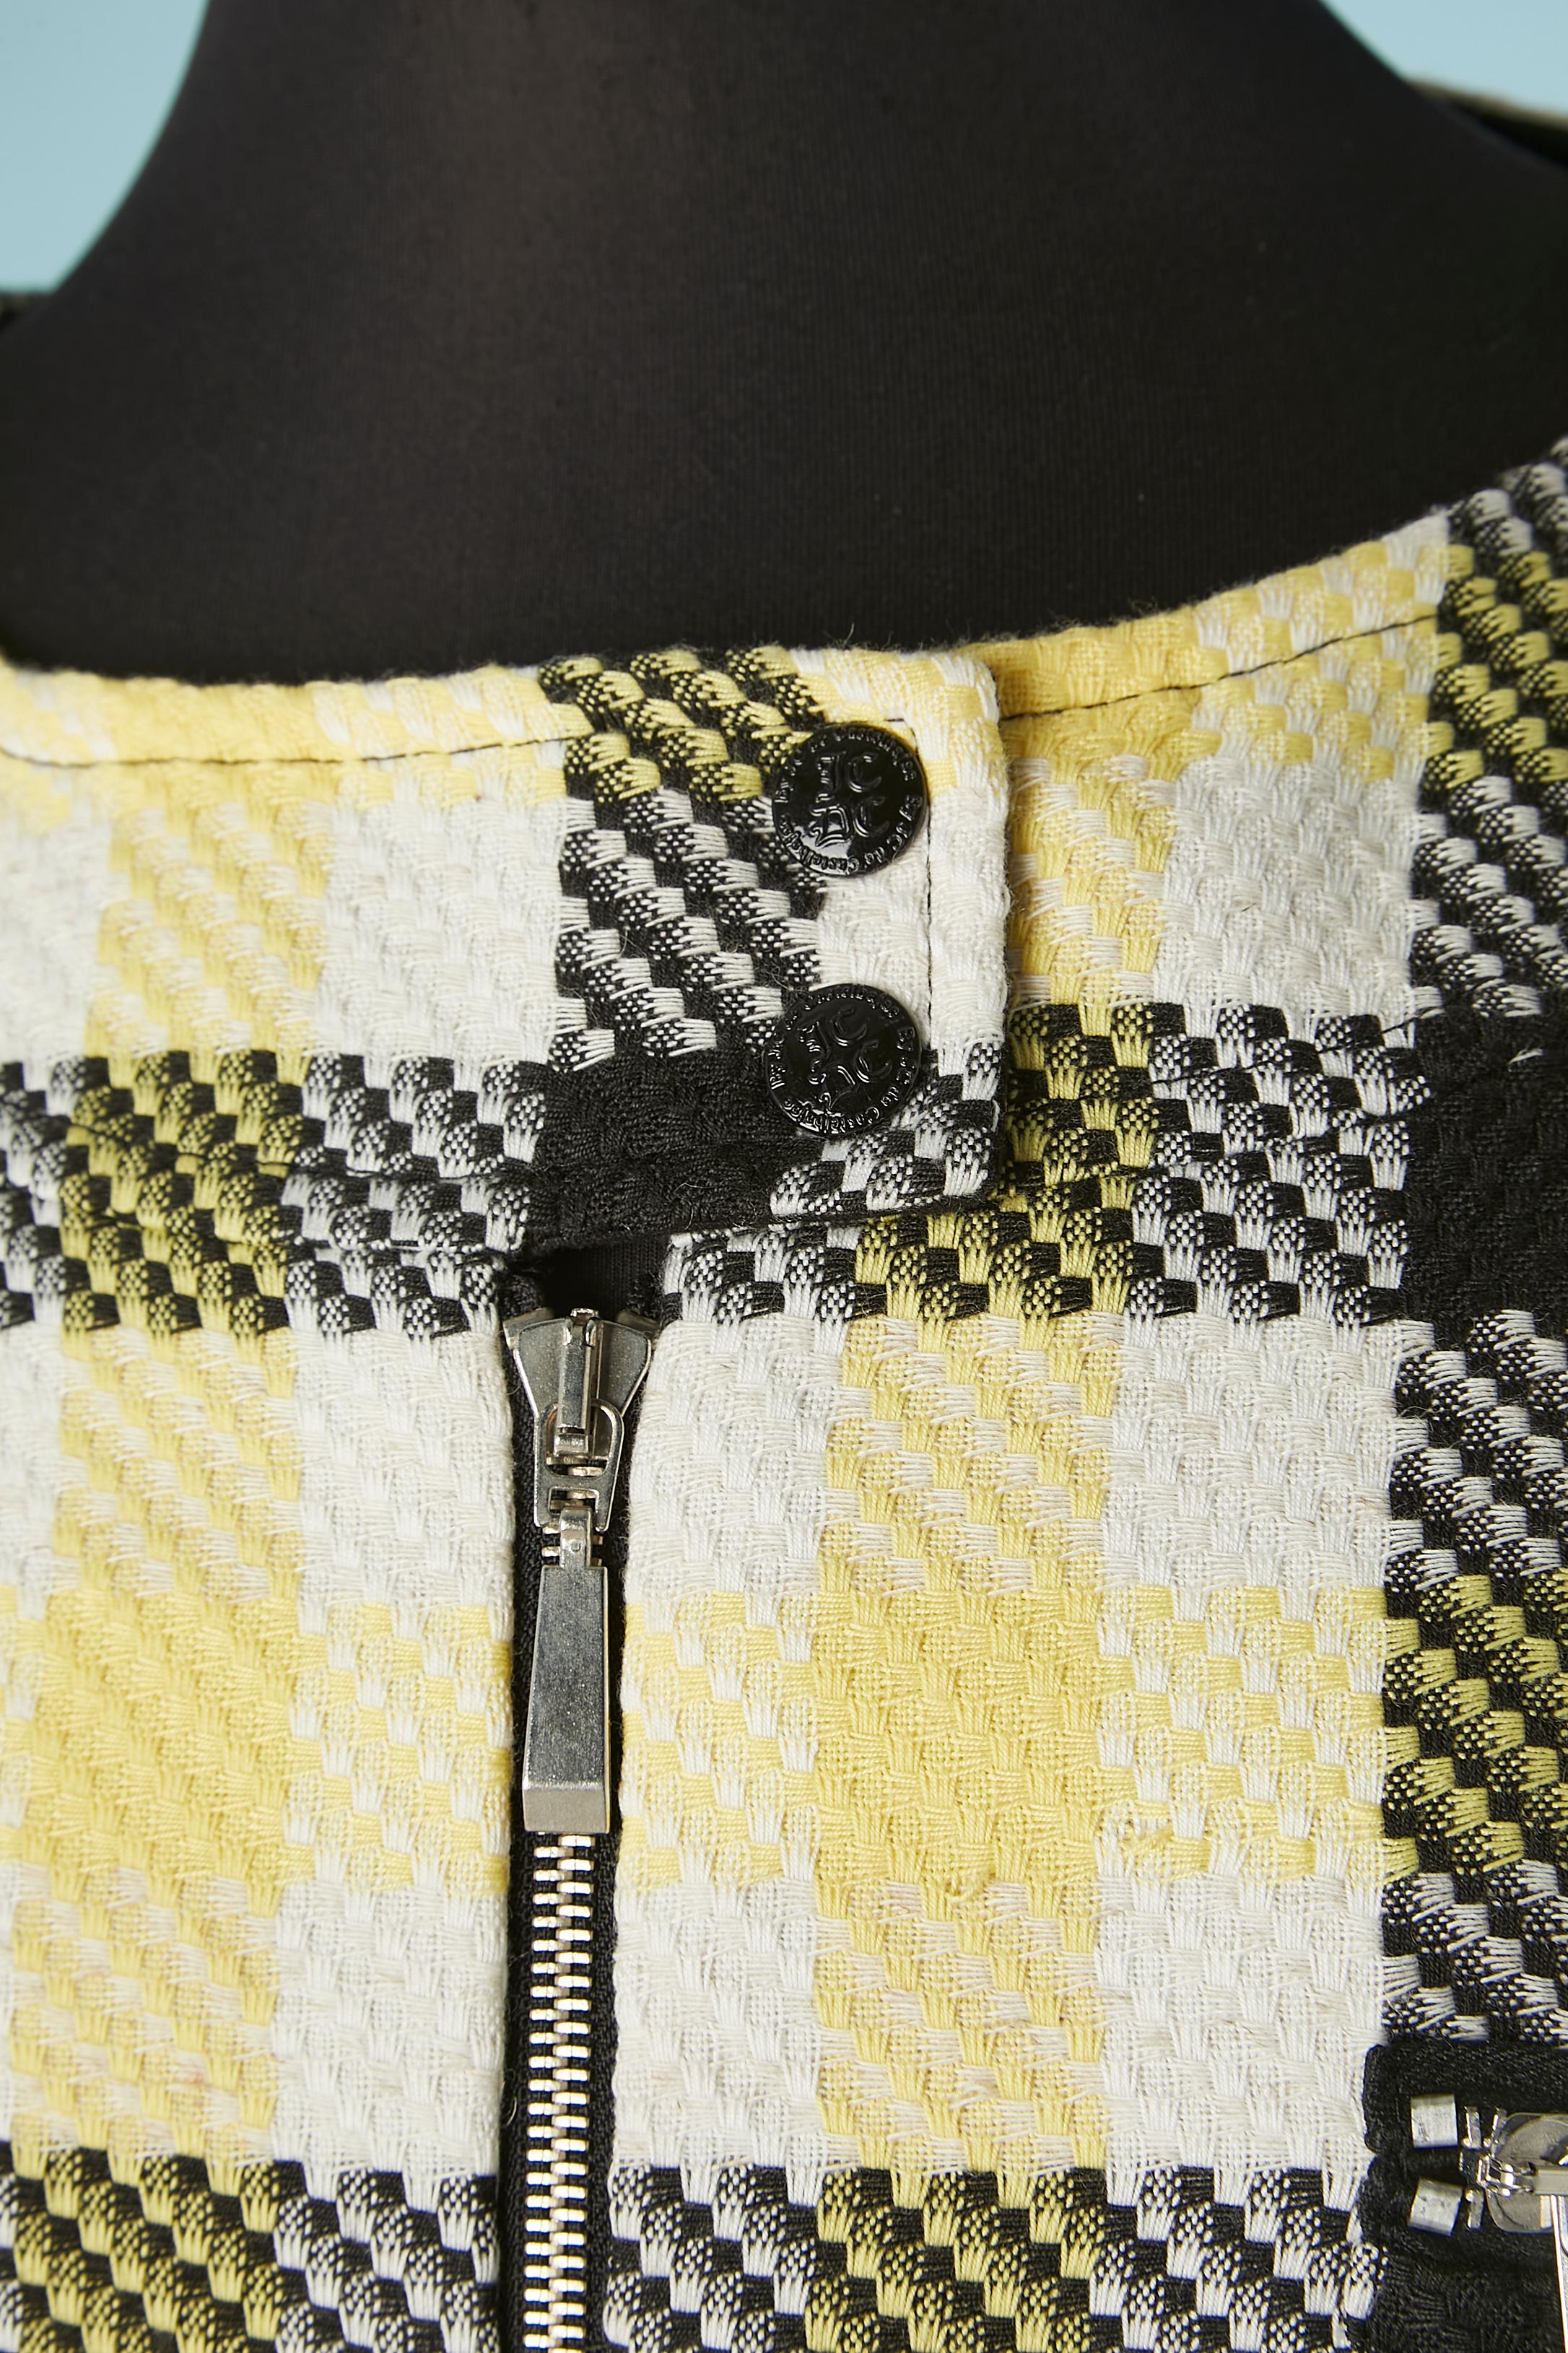 Yellow, black and white check jacket. Fabric composition: 61% polyester, 2% rayon, 12% linen, 9% cotton, 3% elastane. Lining: 100% rayon
Zip in the middle front and pockets. Branded buttons and snaps. Black elastic band on the side in the bottom of